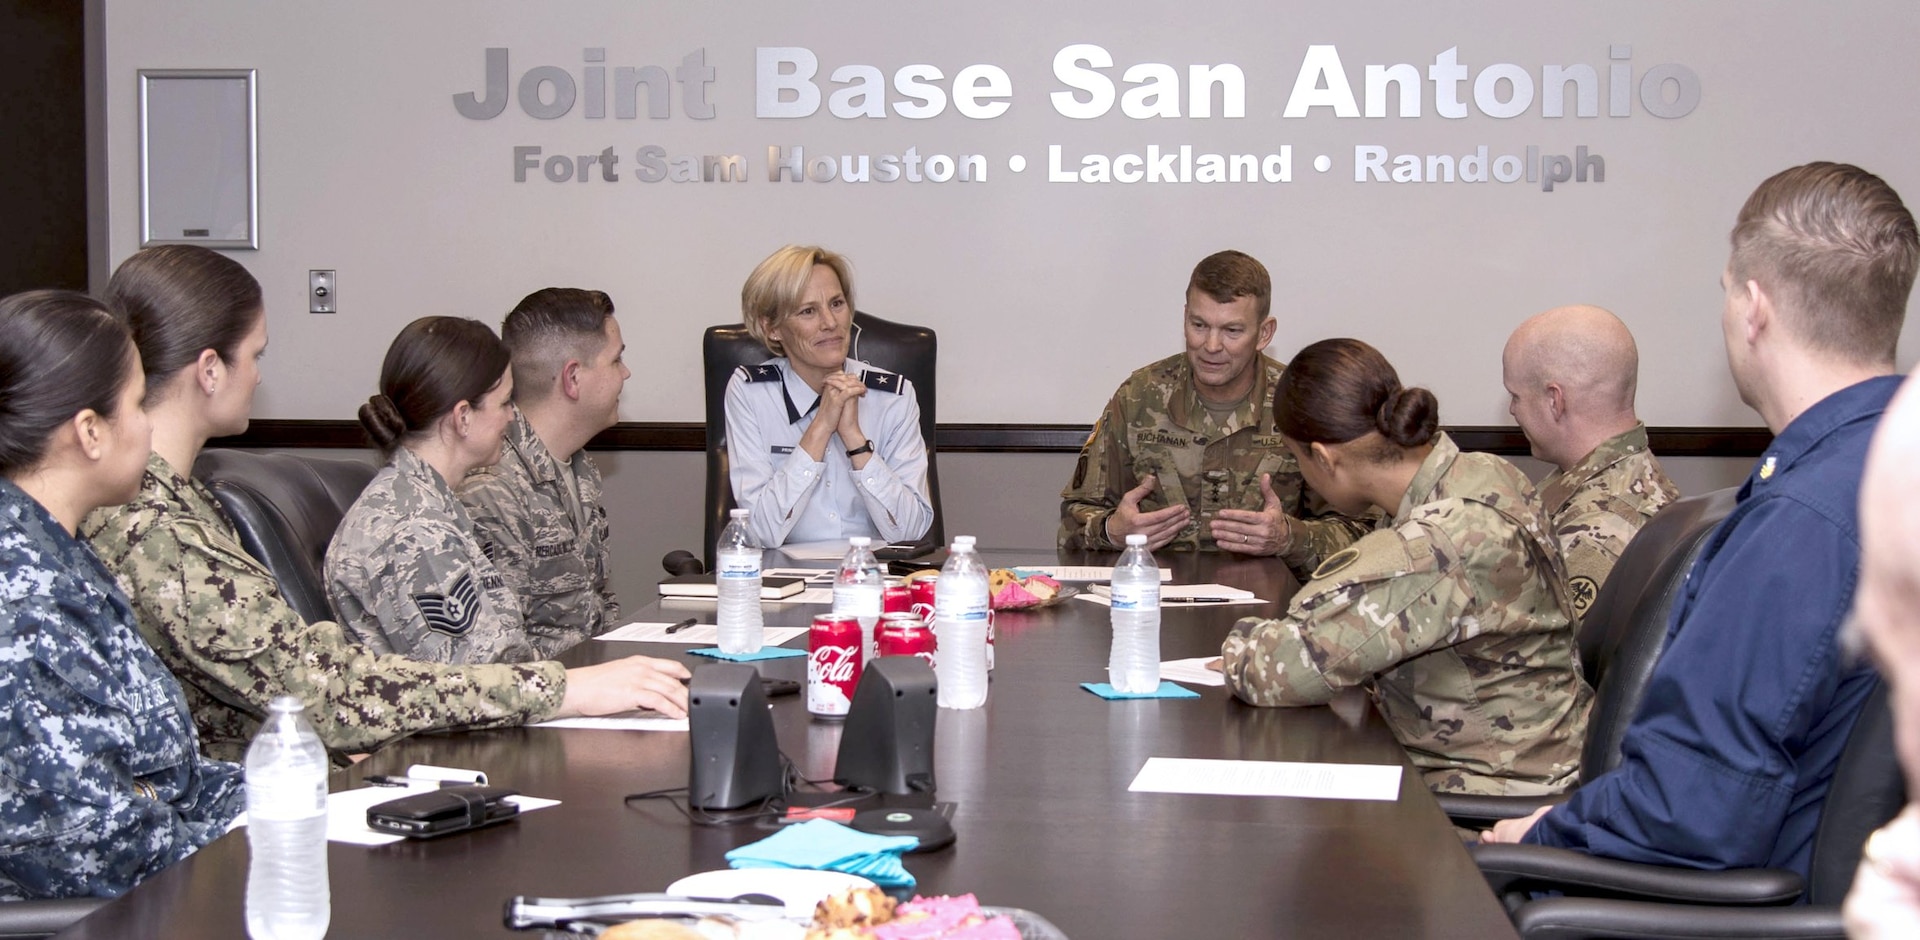 Brig. Gen. Heather Pringle, commander of the 502nd Air Base Wing and Joint Base San Antonio, and Lt. Gen. Jeffrey Buchanan, commanding general of U.S. Army North (Fifth Army) hosted a meet-and-greet session for the 2018 JBSA Military Ambassadors at the wing conference room at JBSA-Fort Sam Houston Jan. 10.